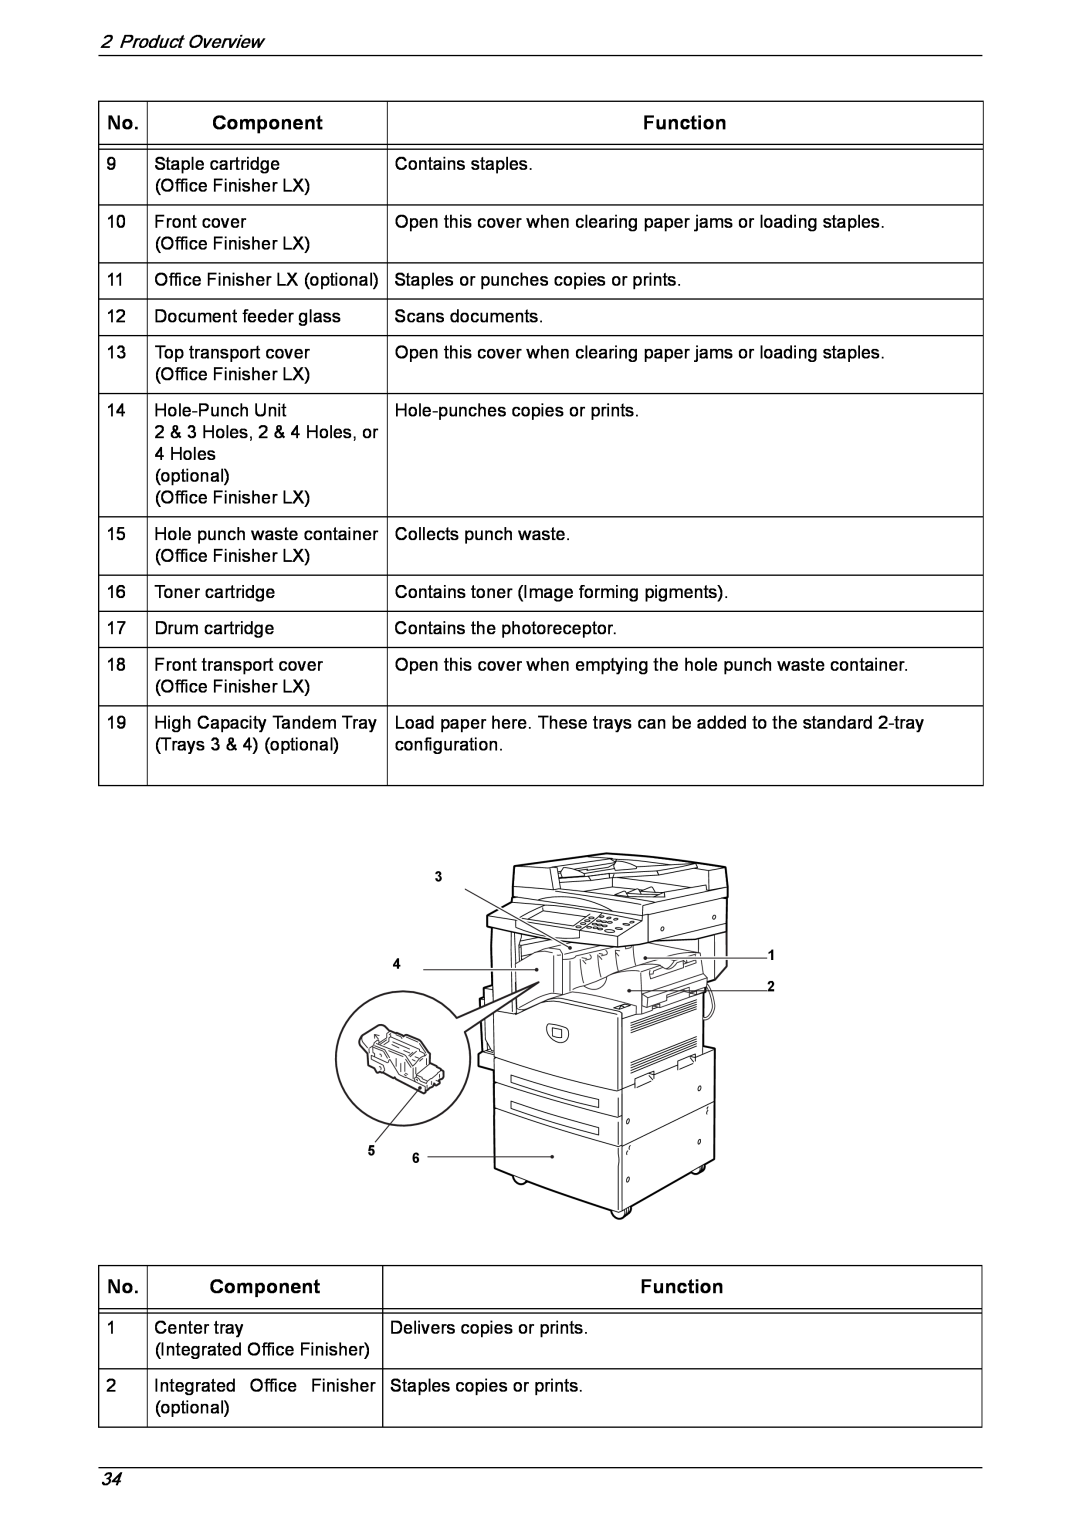 Xerox 5230 manual Component, Function, Product Overview 